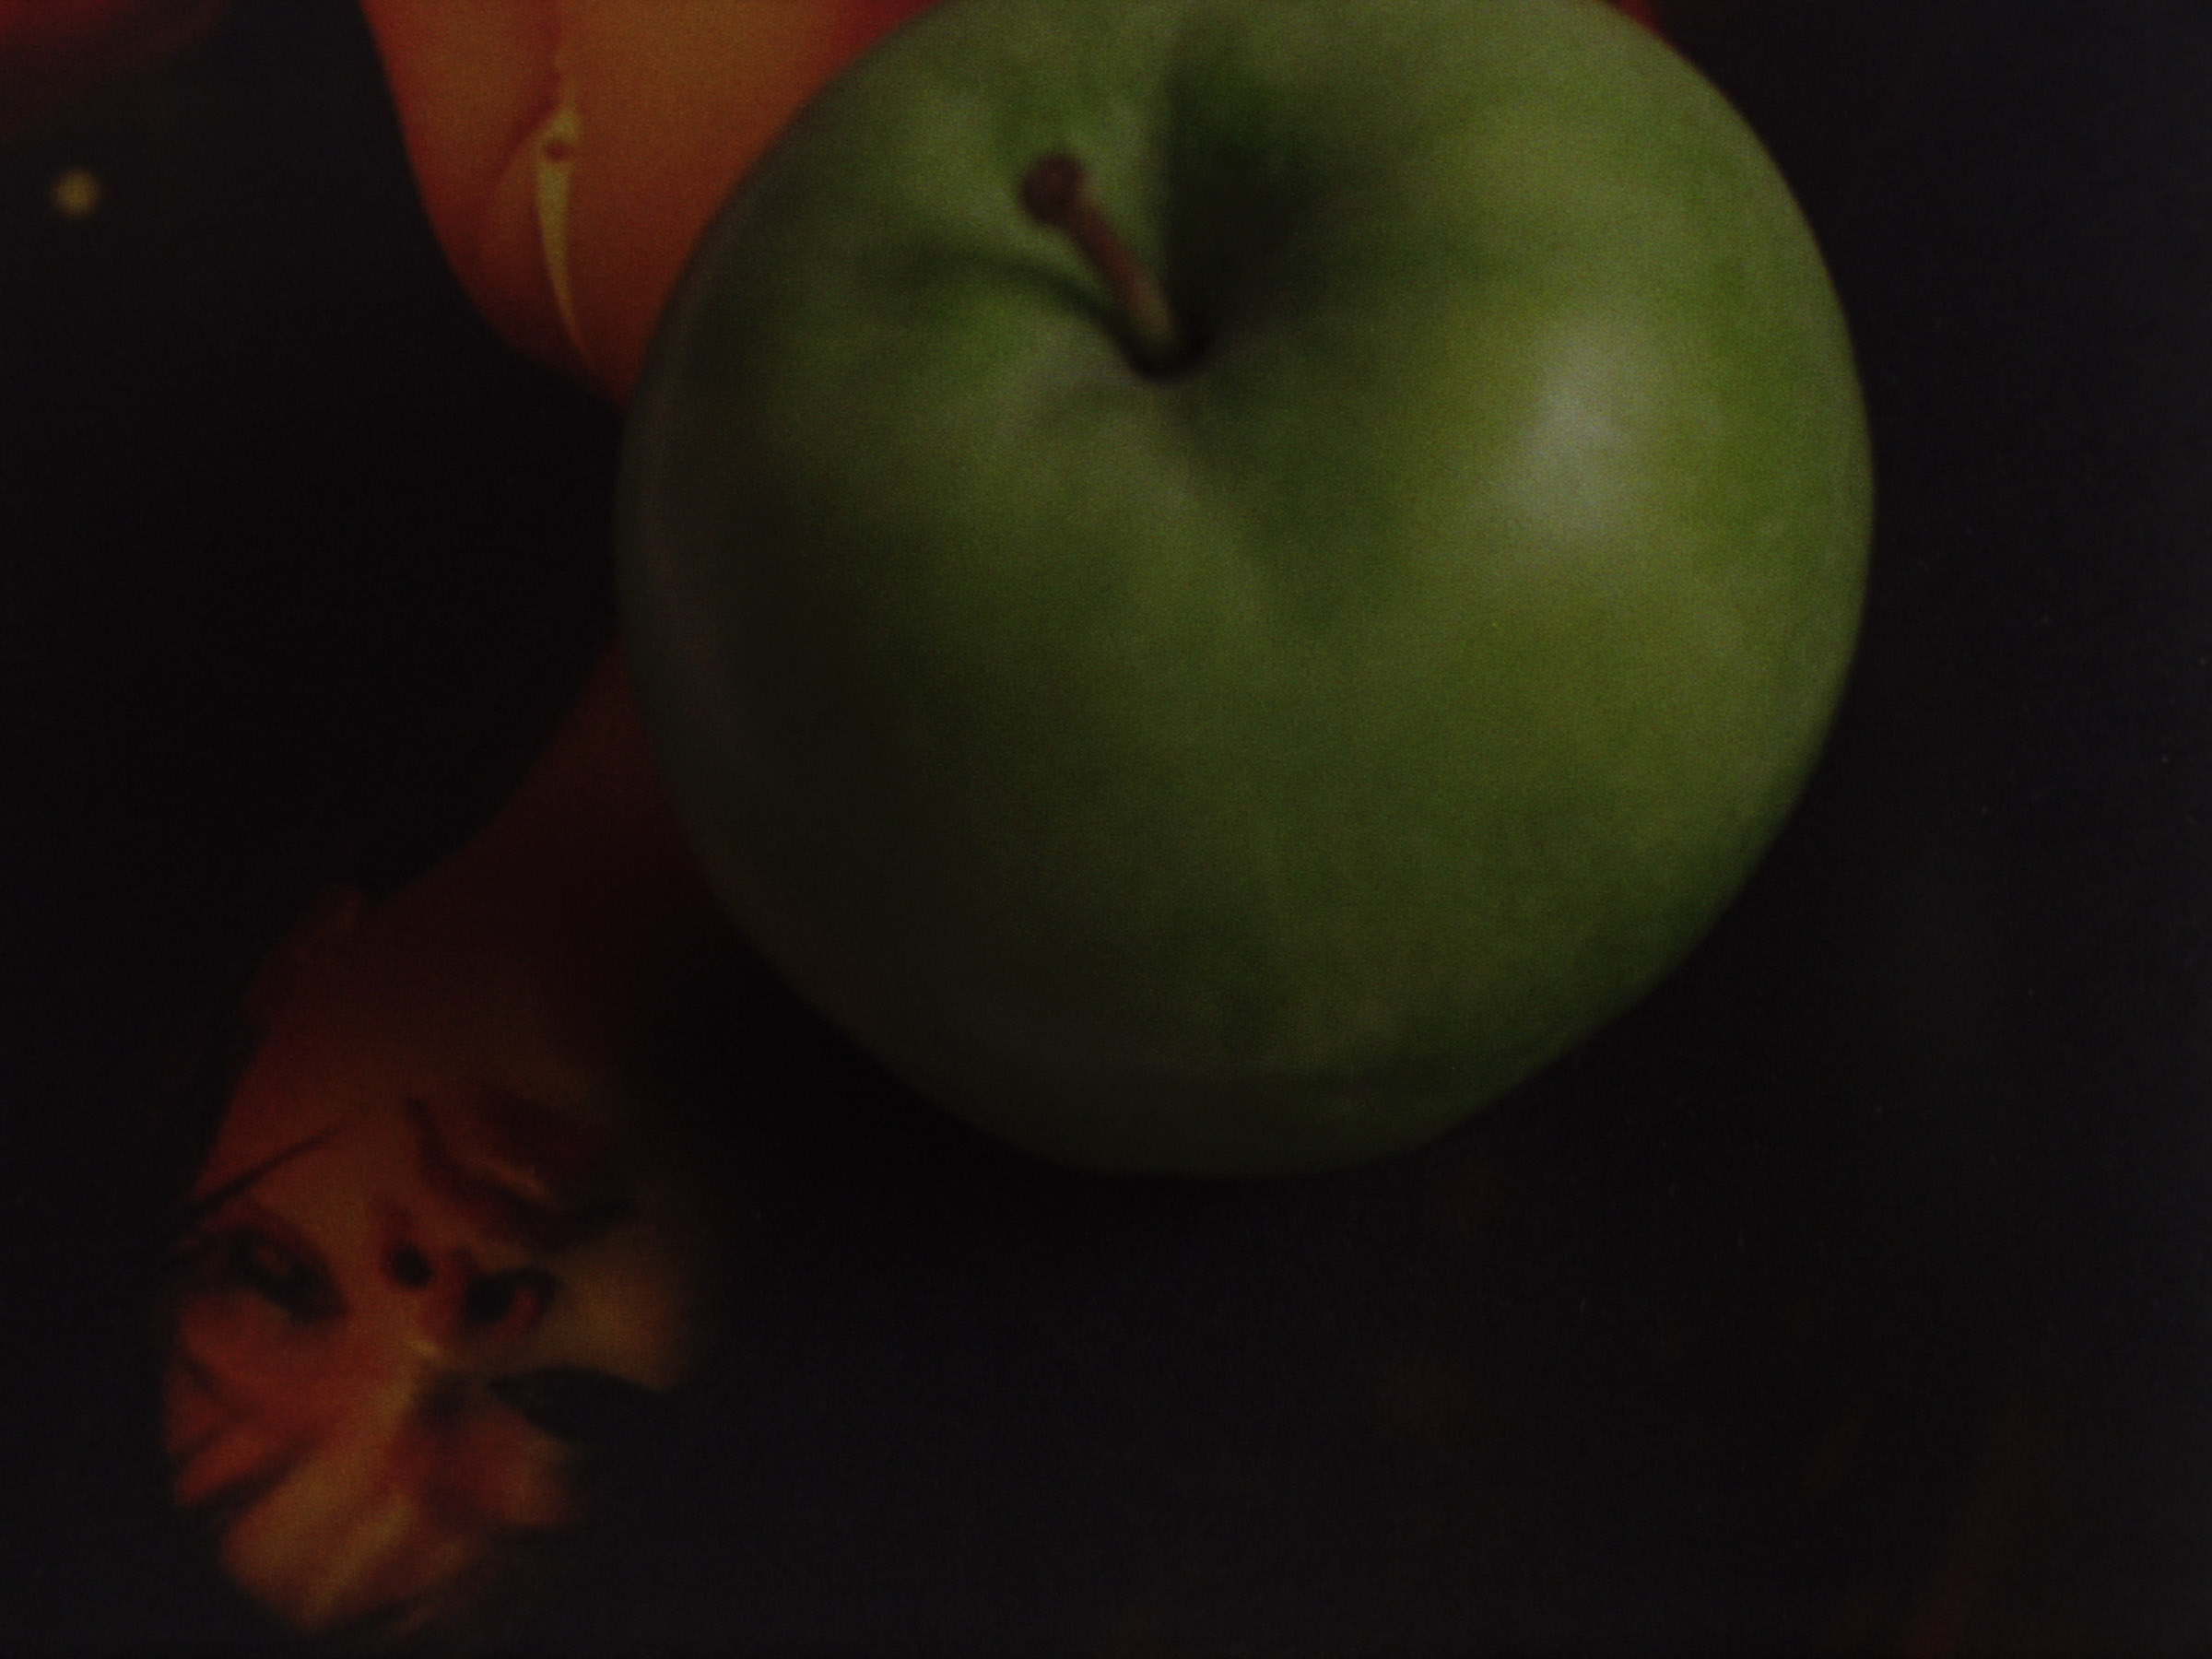 16 mm film still: a green apple lying on a picture of Rihanna